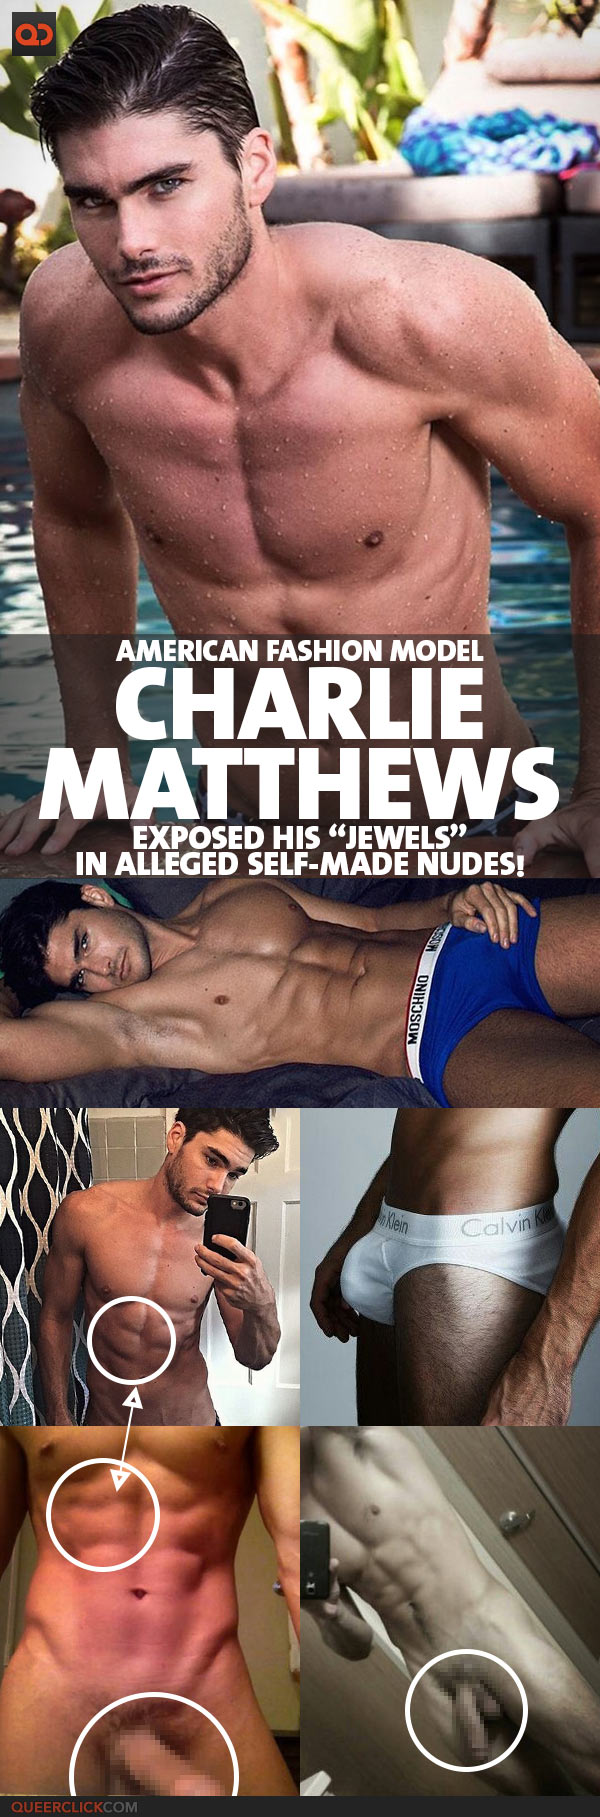 Charlie Matthews, American Fashion Model, Exposed His “Jewels” In Alleged Self-Made Nudes!